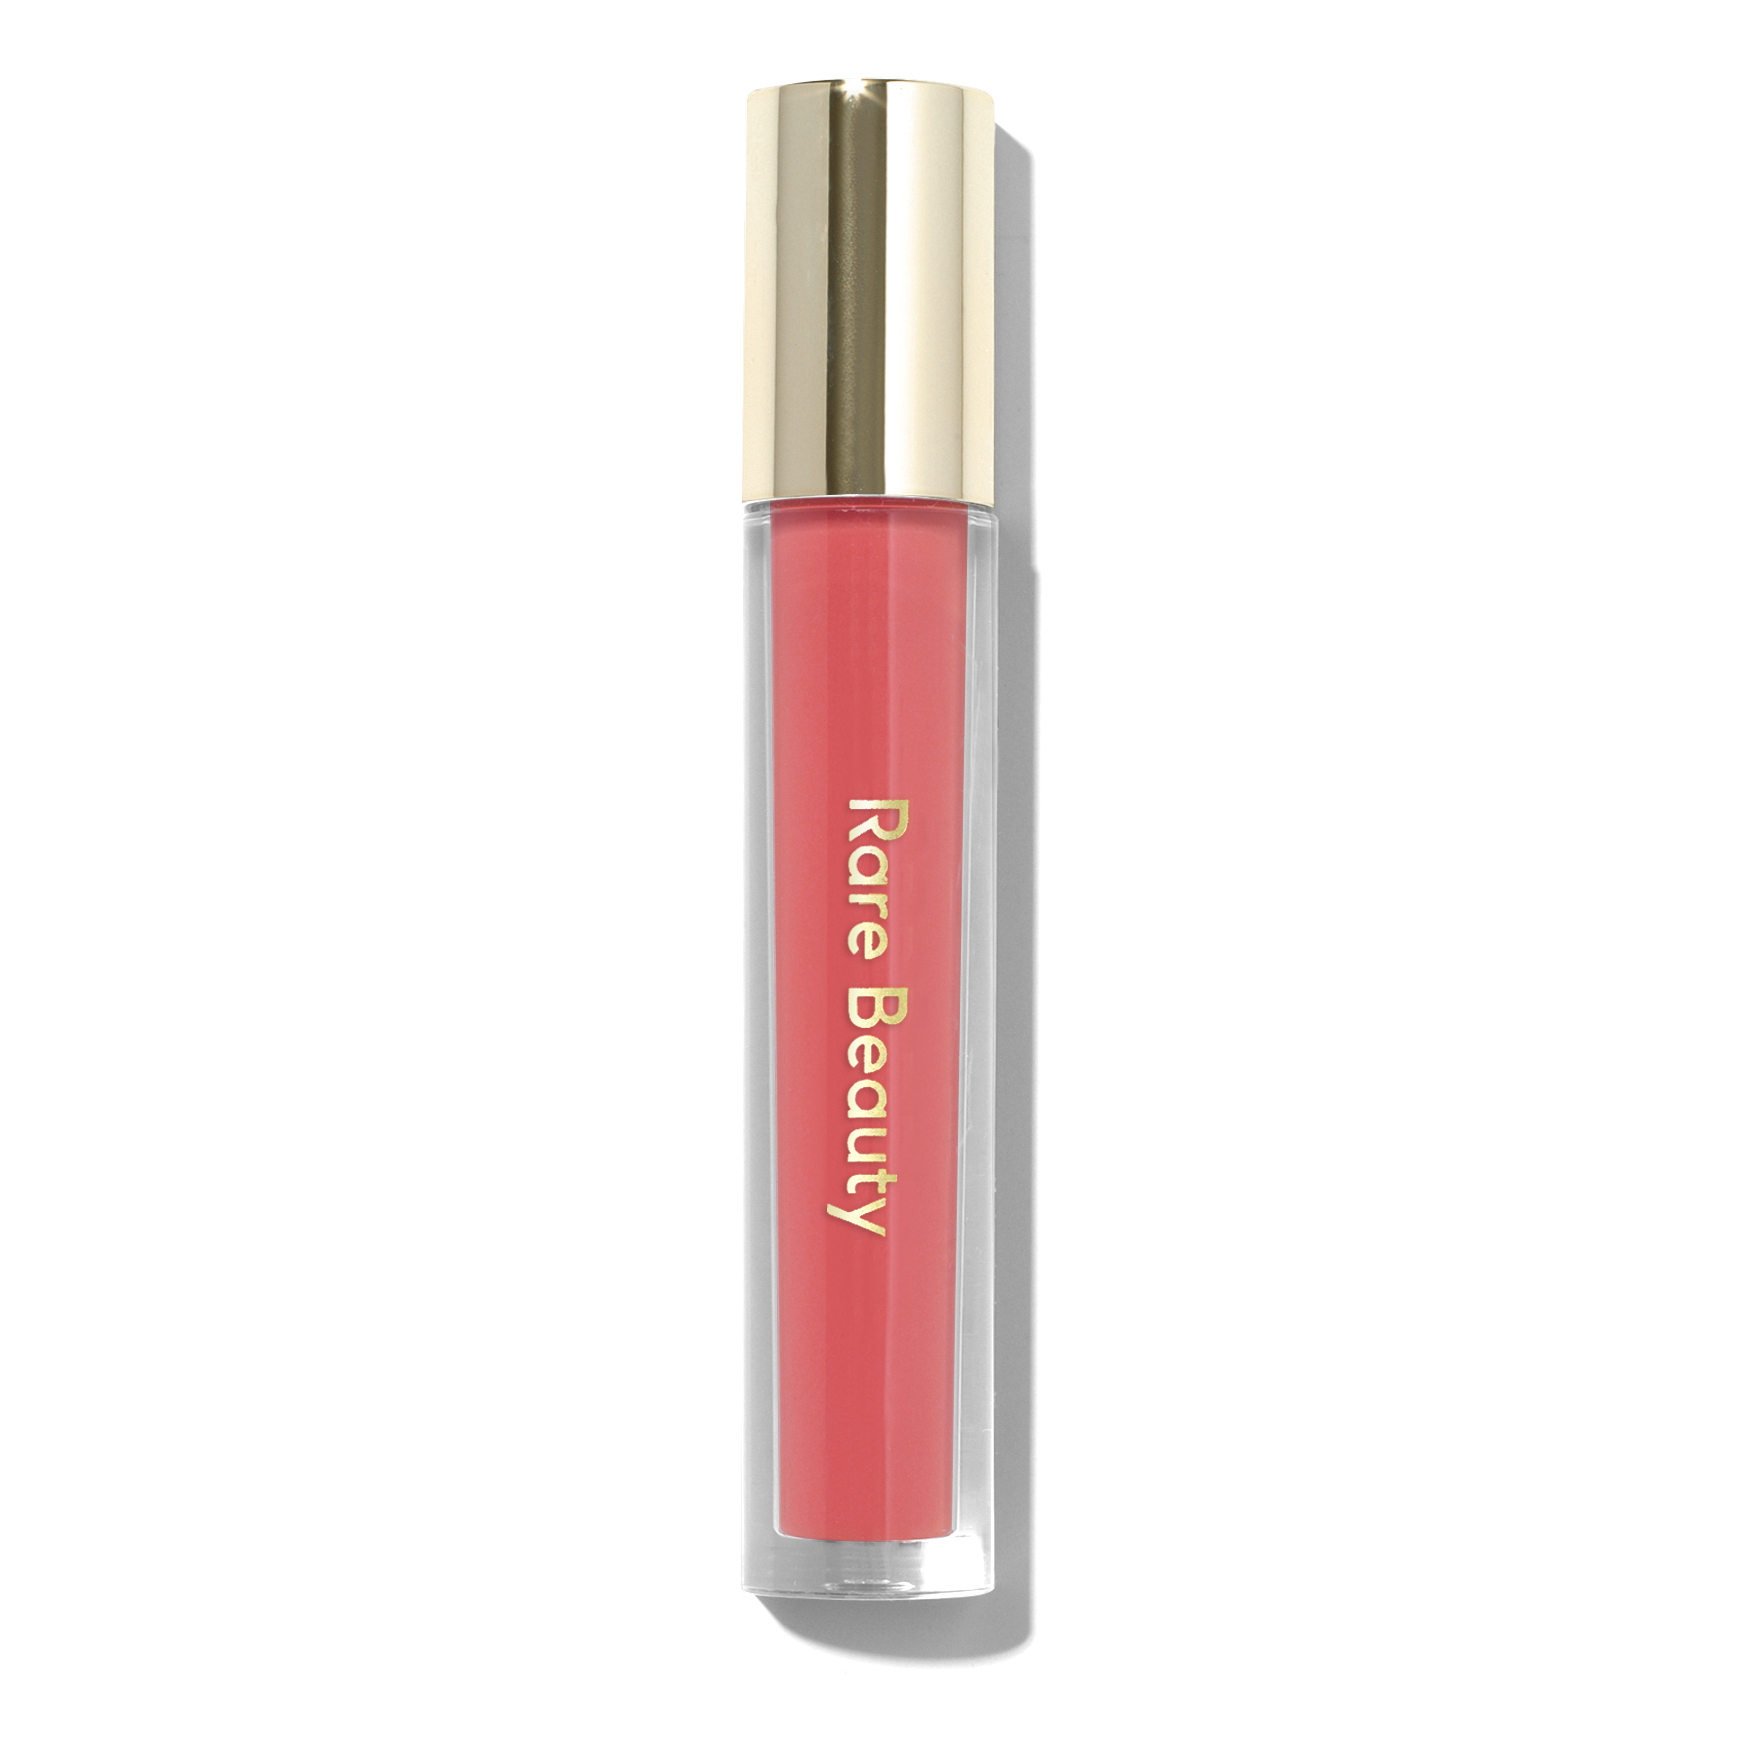 Rare Beauty Stay Vulnerable Glossy Lip Balm | Space NK